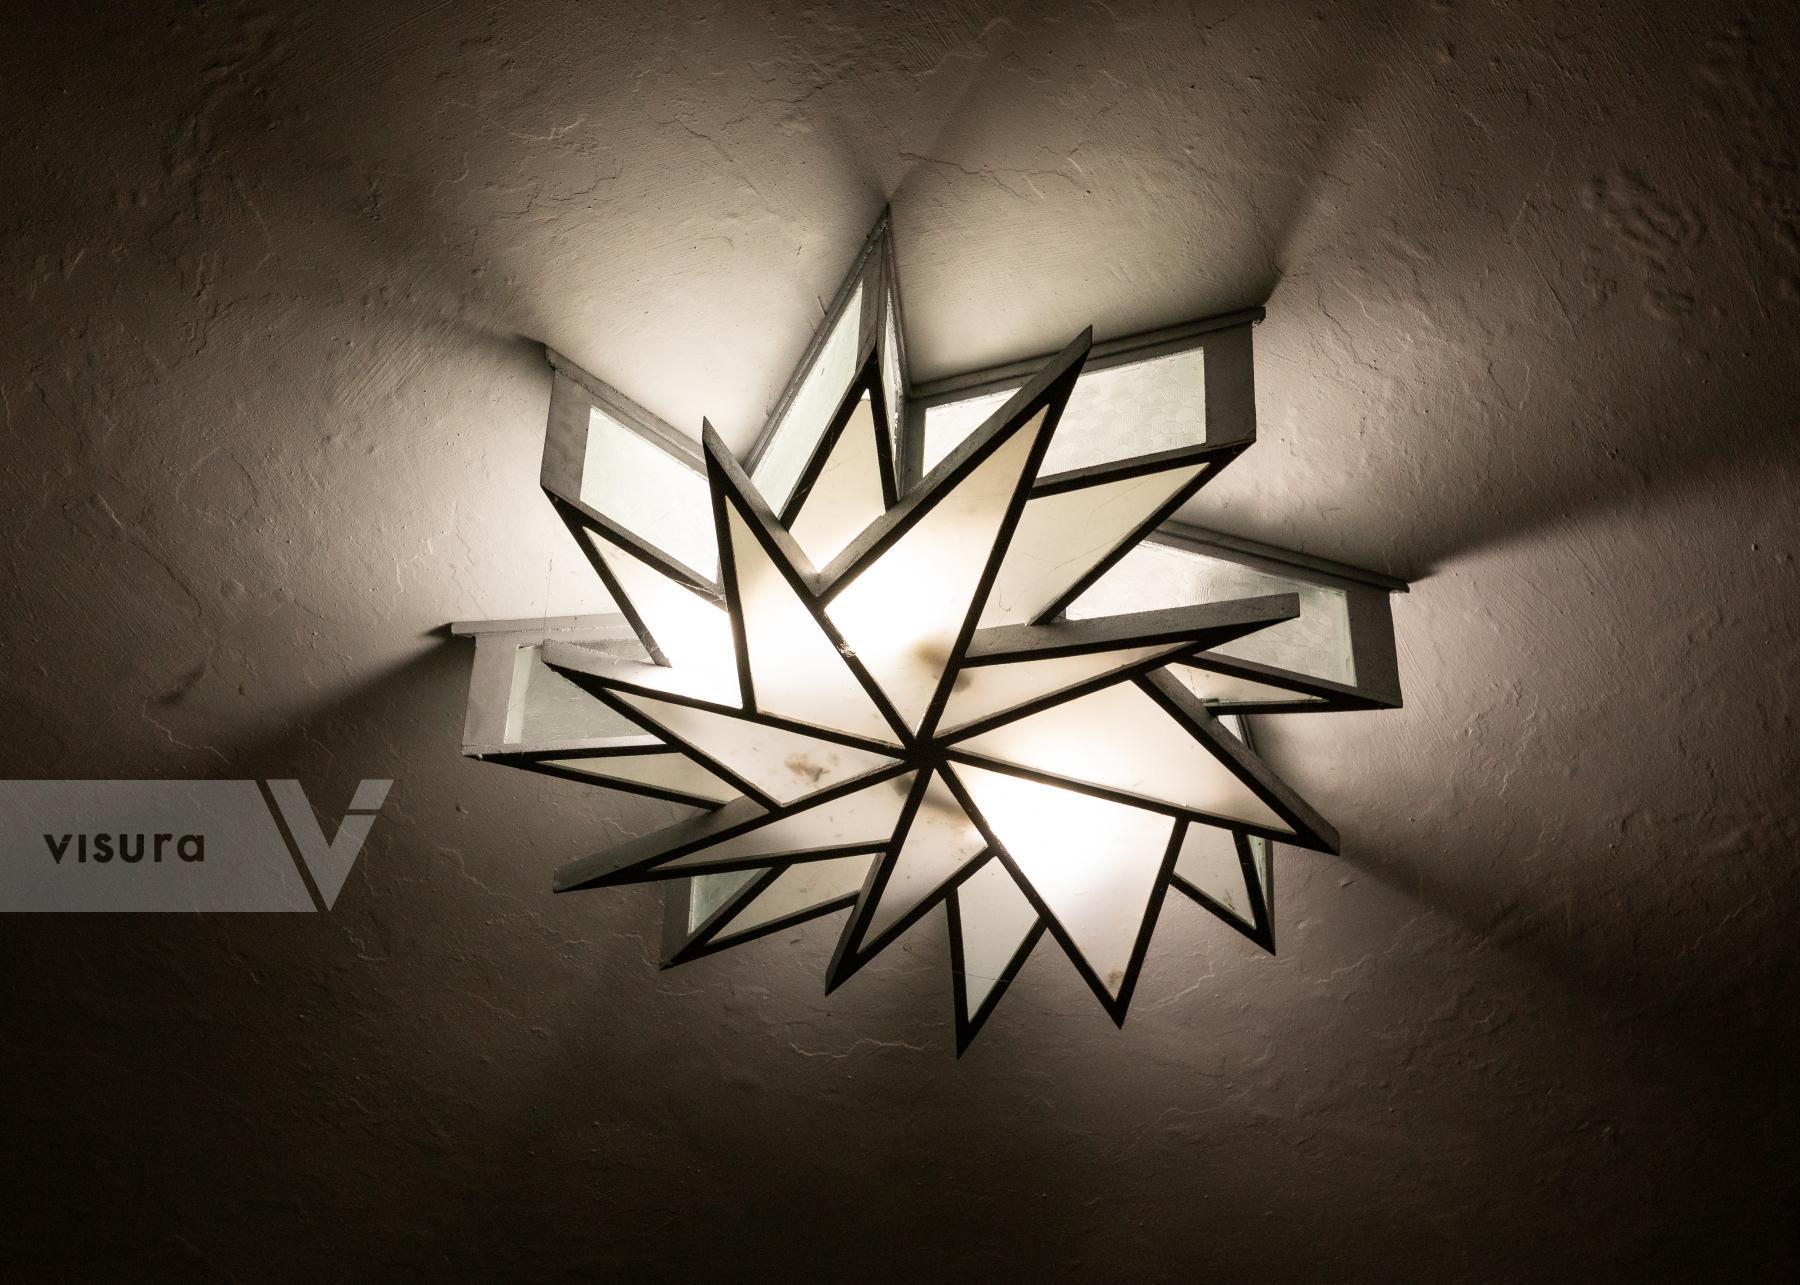 Purchase Light Fixture, Lopez Serrano Building by Silvia Ros